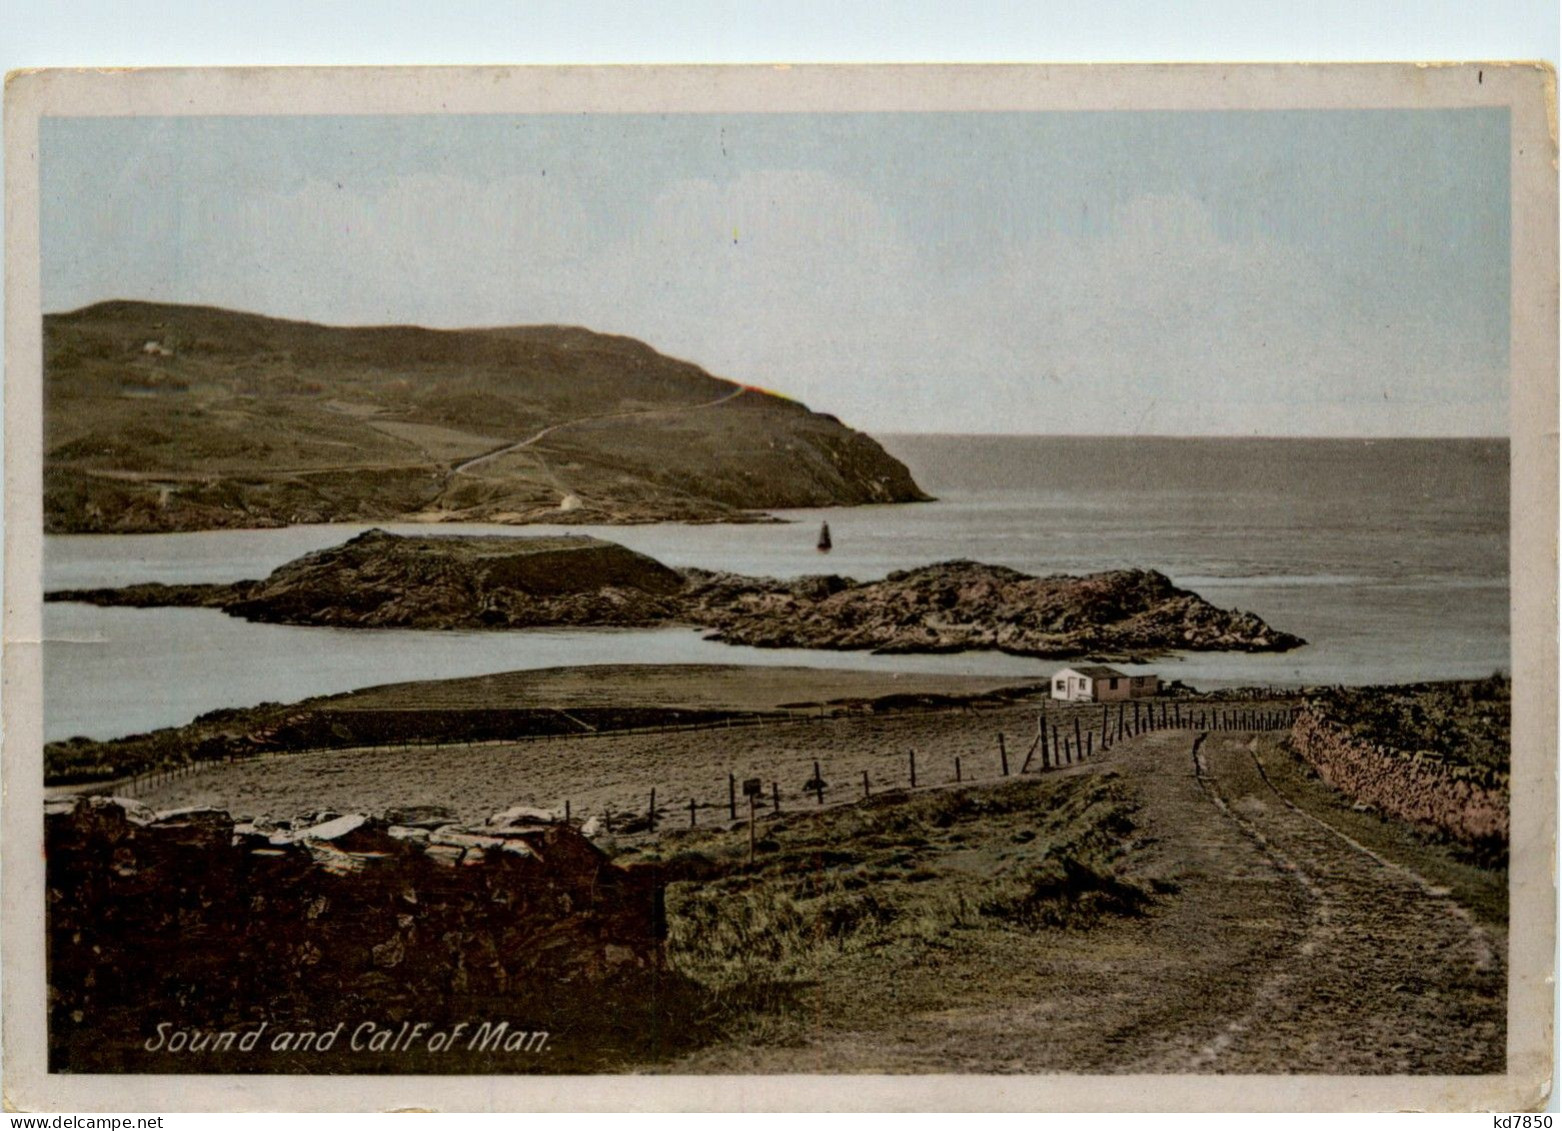 Sound And Calf Of Man - Isle Of Man